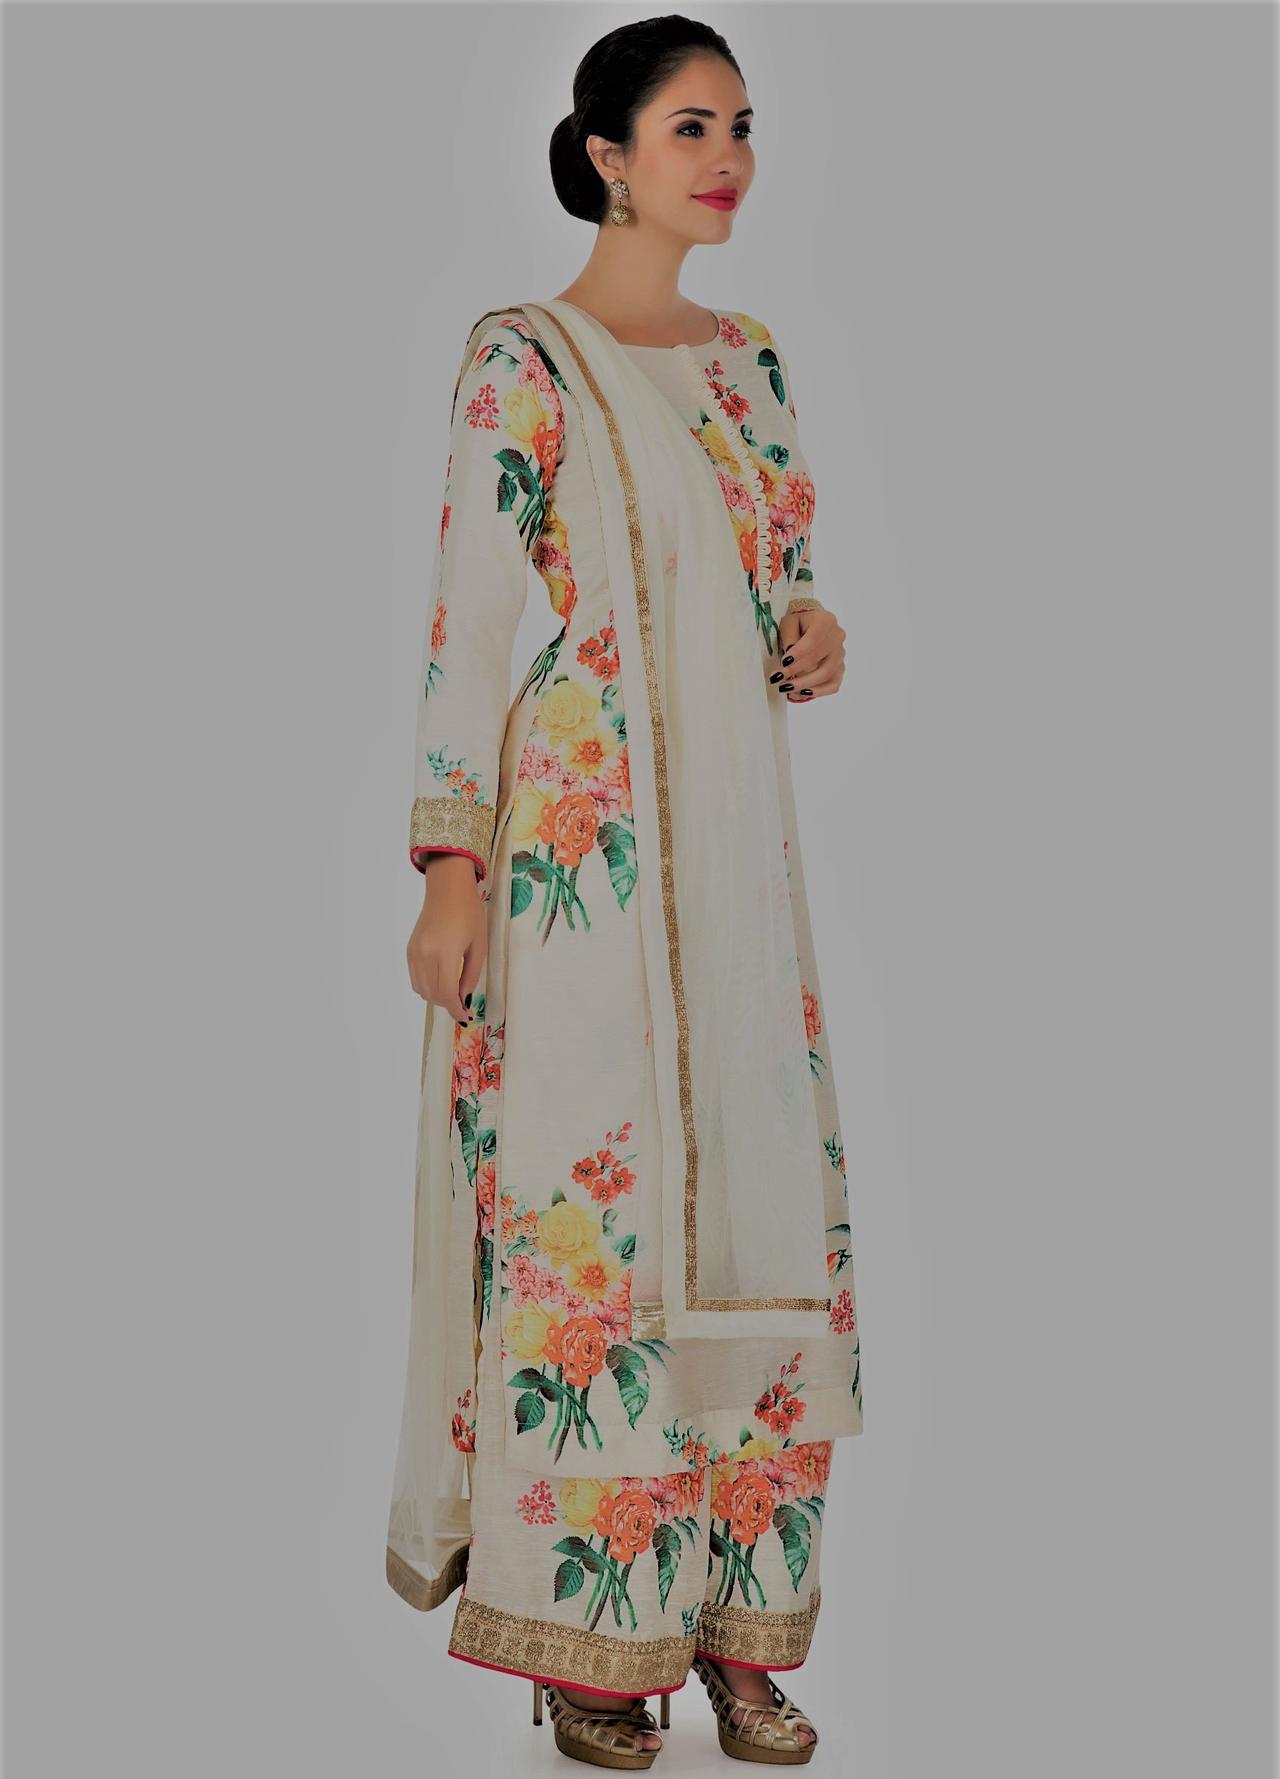 Discover 167+ designer long kurti with palazzo best